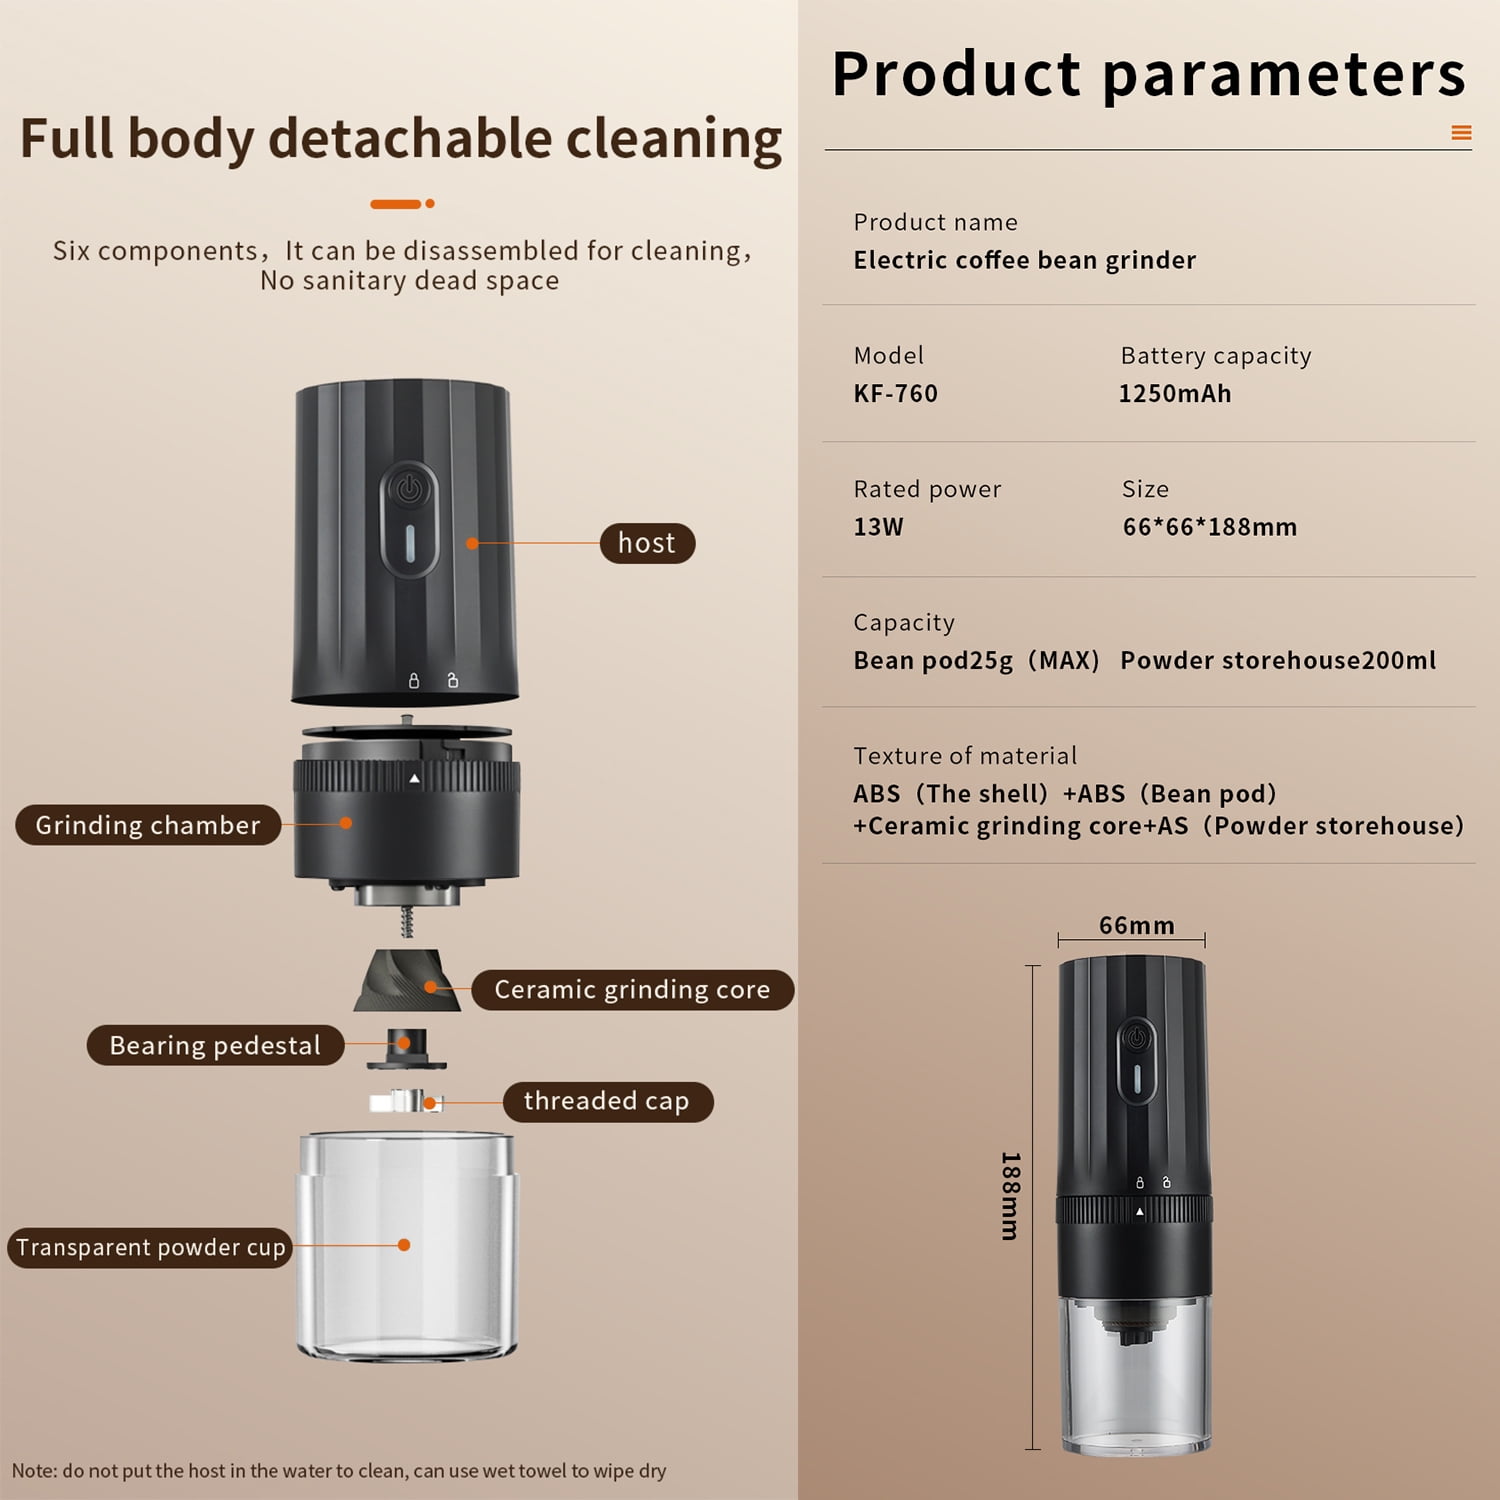 Ktcina Portable Electric Burr Coffee Grinder USB Rechargeable Small Coffee Bean Grinder with Multiple Grinding Settings Automatic Conical Burr Grinder